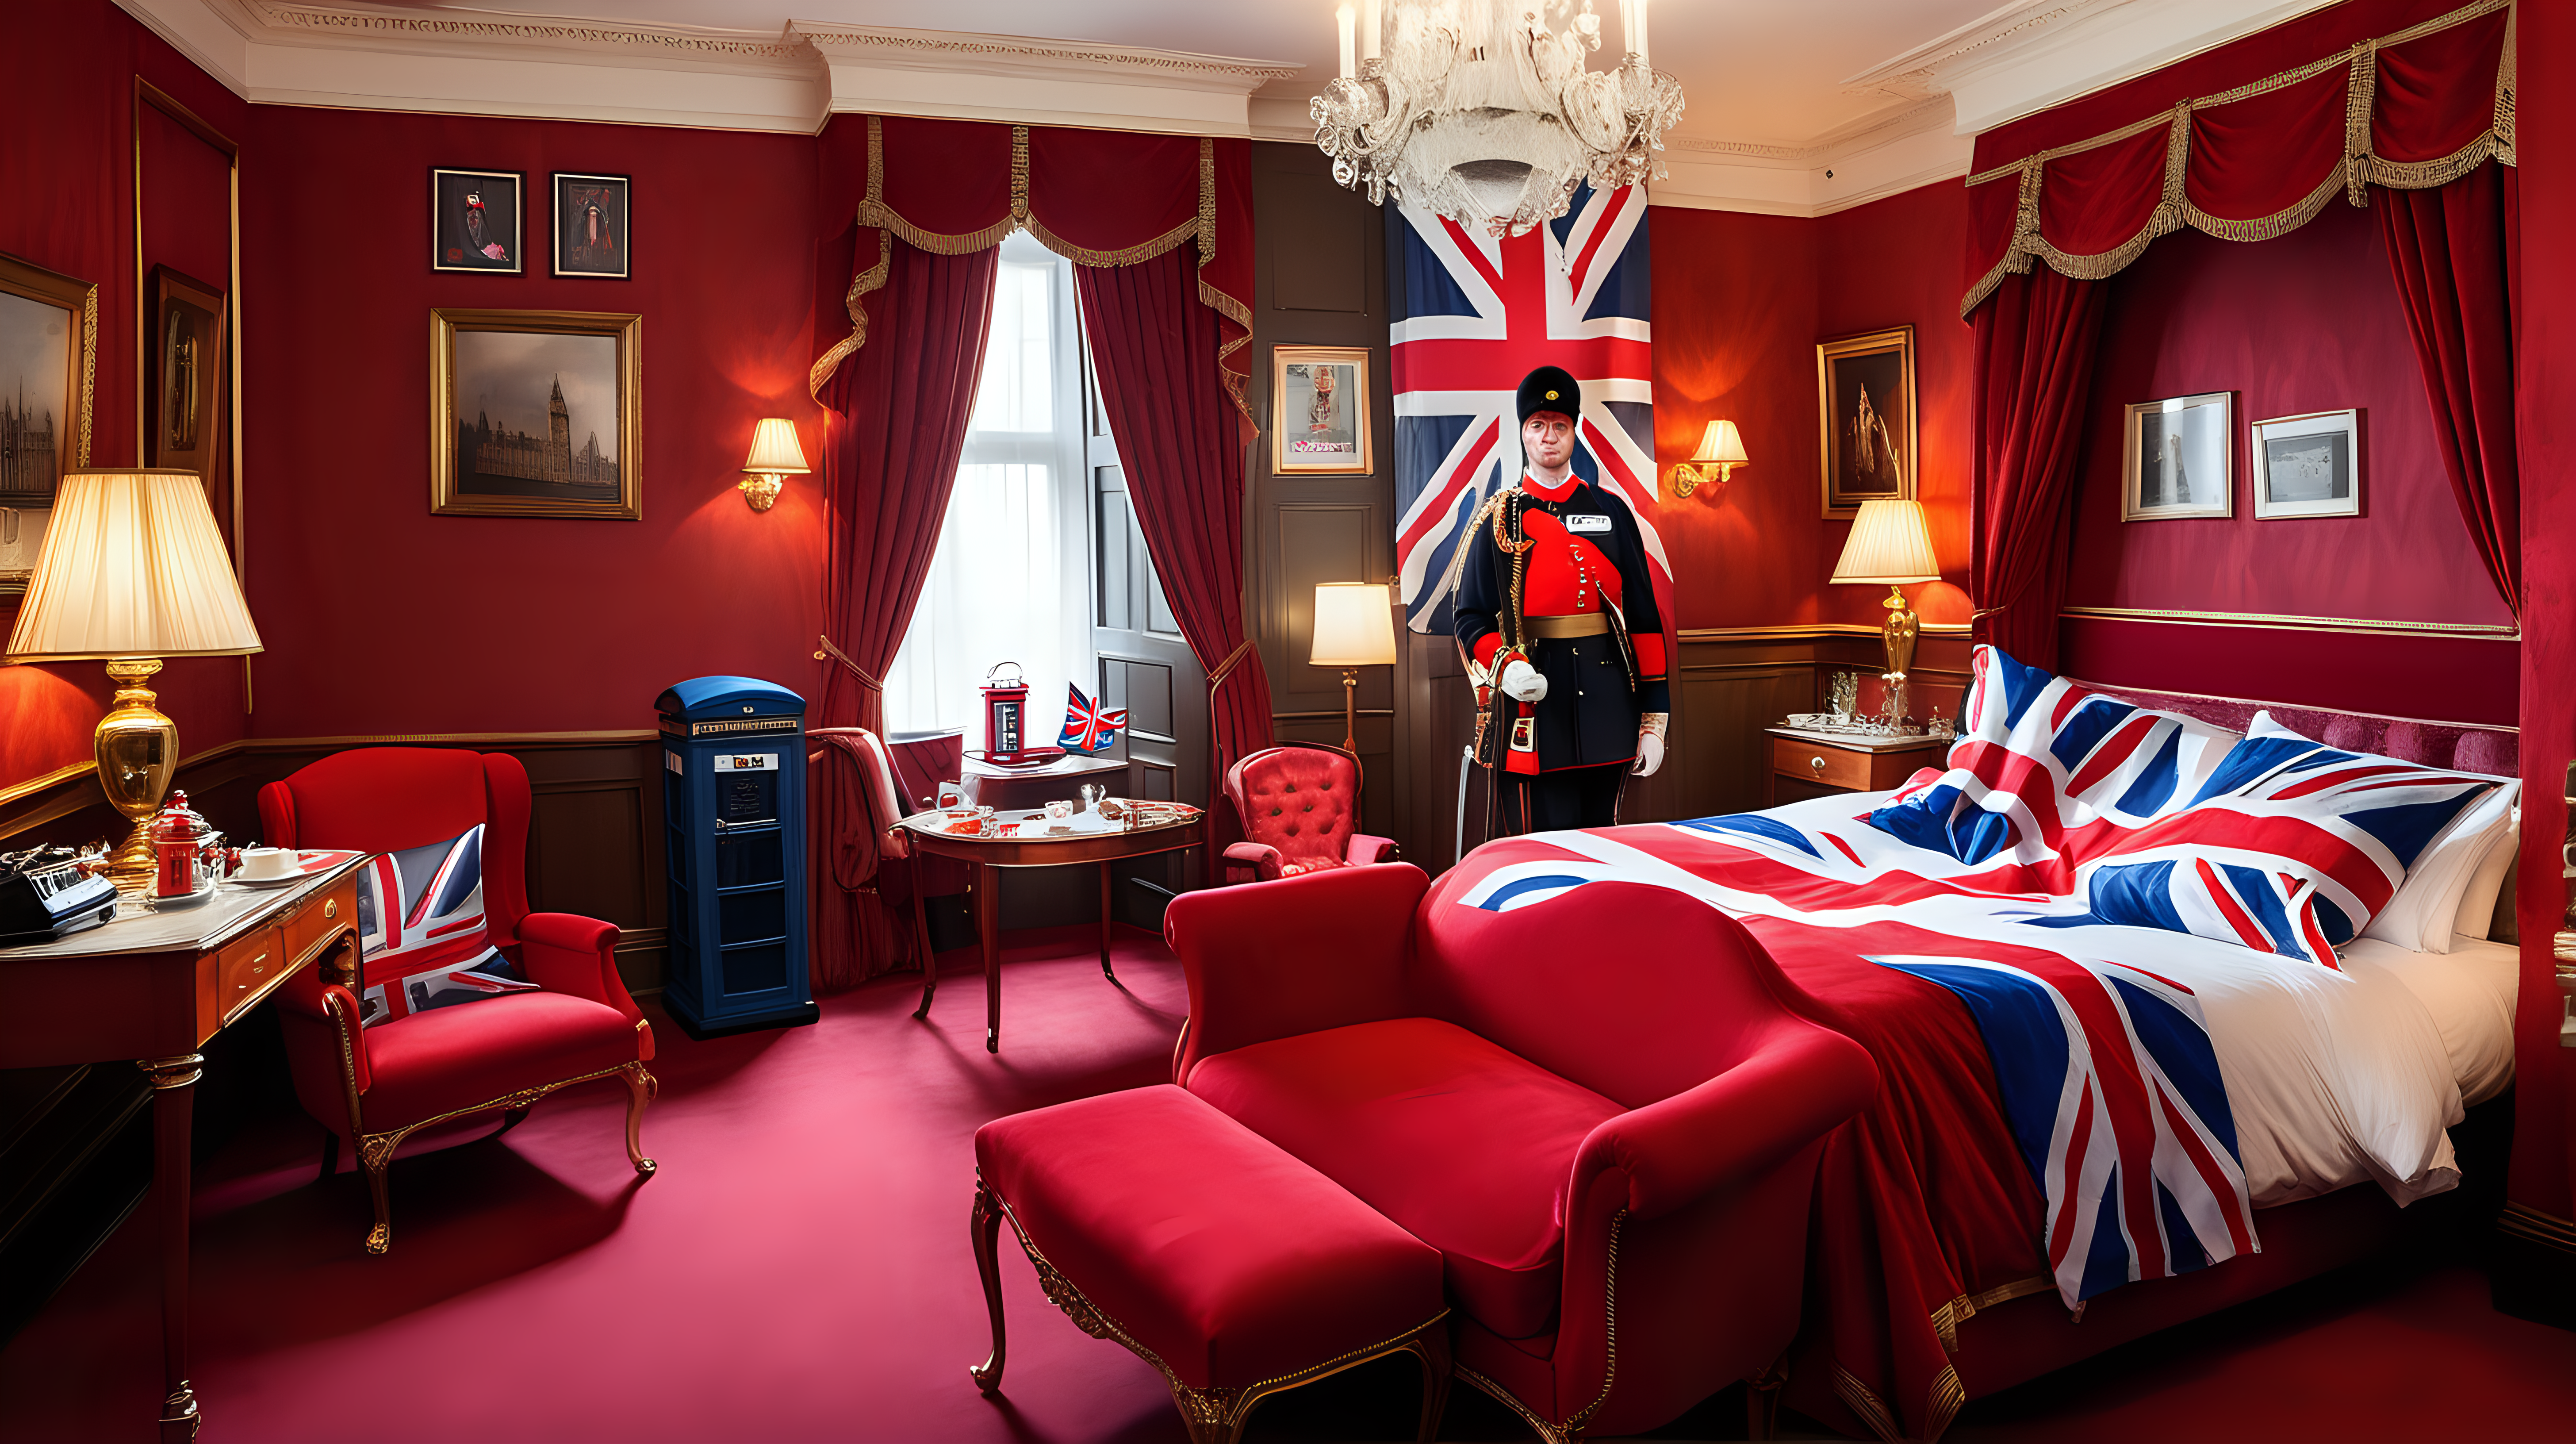 very royal Hotel room decorated over the top with United Kingdom stereotypes, with Foot Guards, English flags, red bus, telephone booth, tea set, english flag